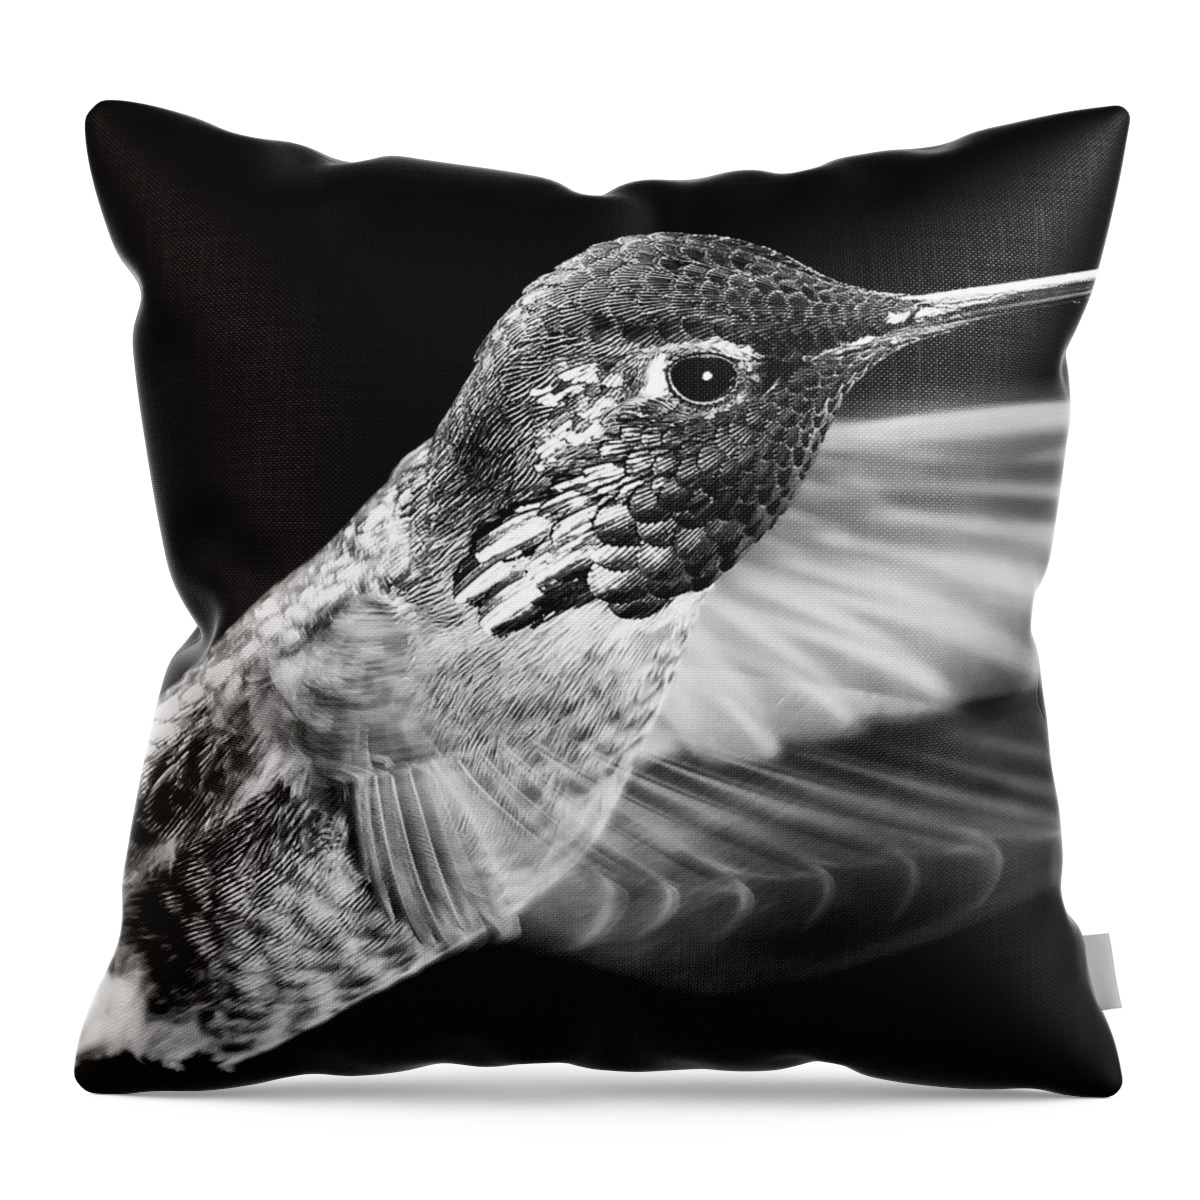 Animal Throw Pillow featuring the photograph Silver Shimmer by Briand Sanderson